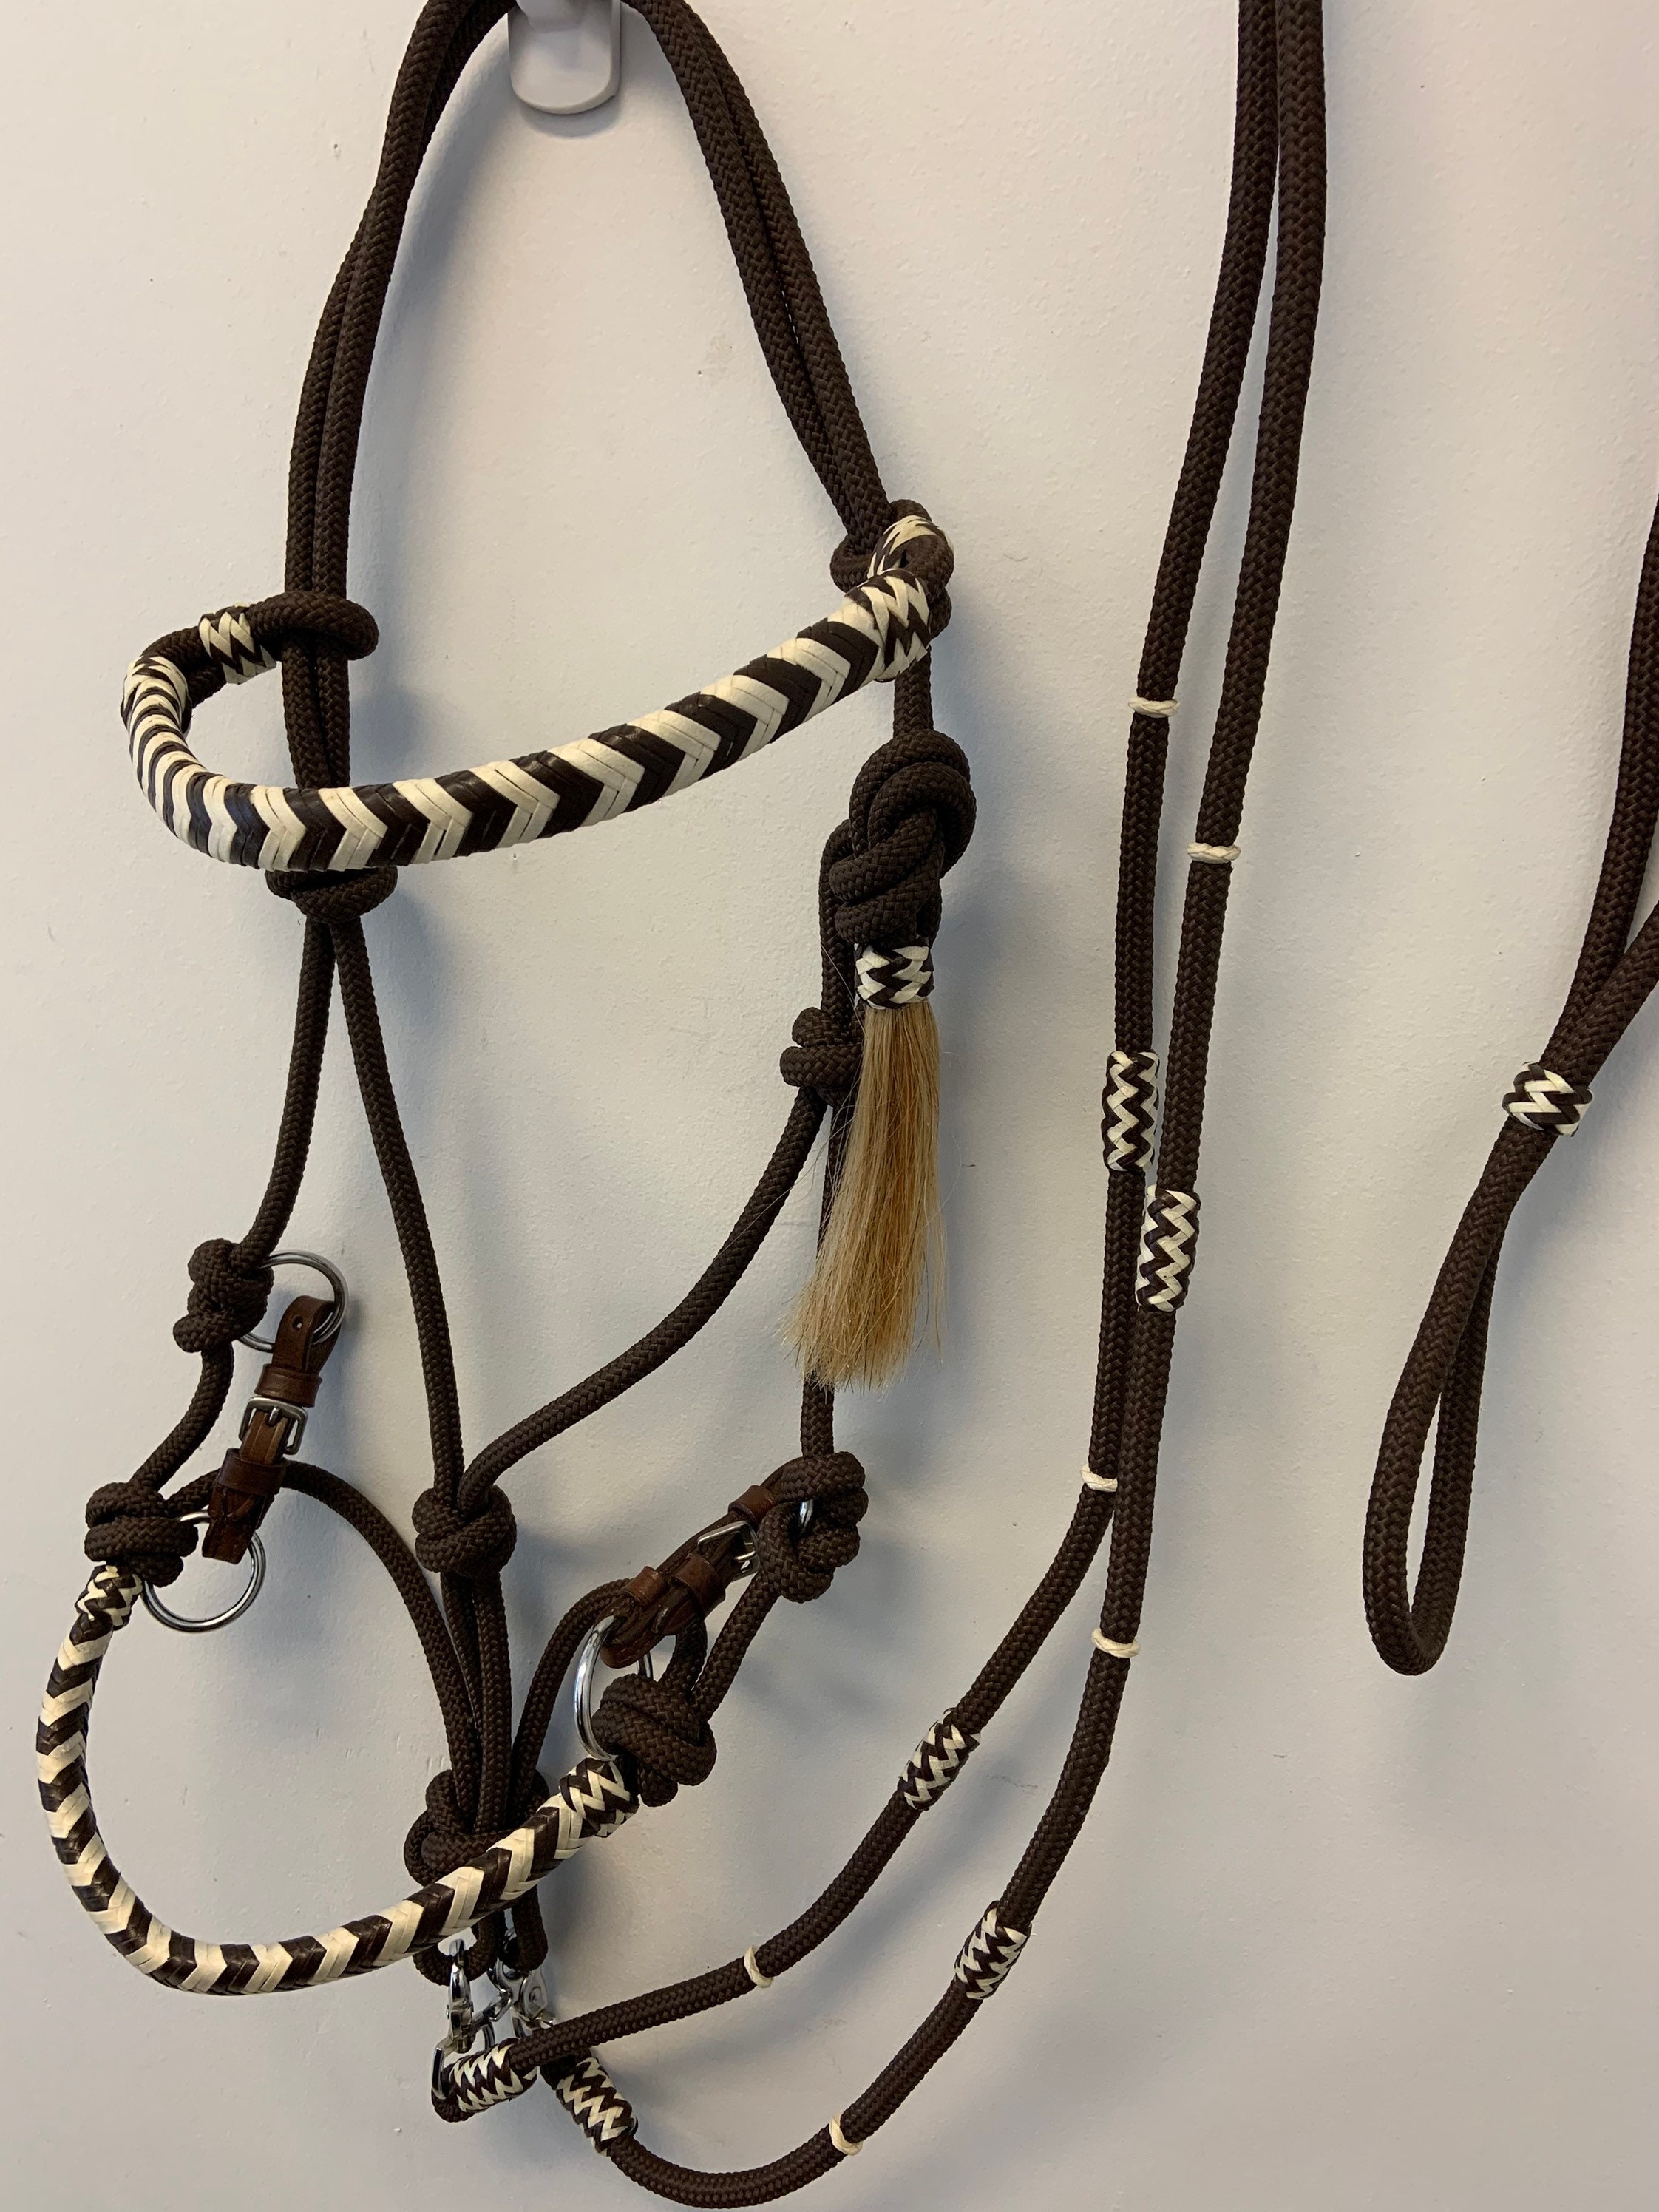 Rawhide Braided Nylon English Halter Style Bitless Bridle: 2 Kinds Horse  Hair full Horse Size Brown or Teal/ Pink/ Purple Black Braided -   Ireland